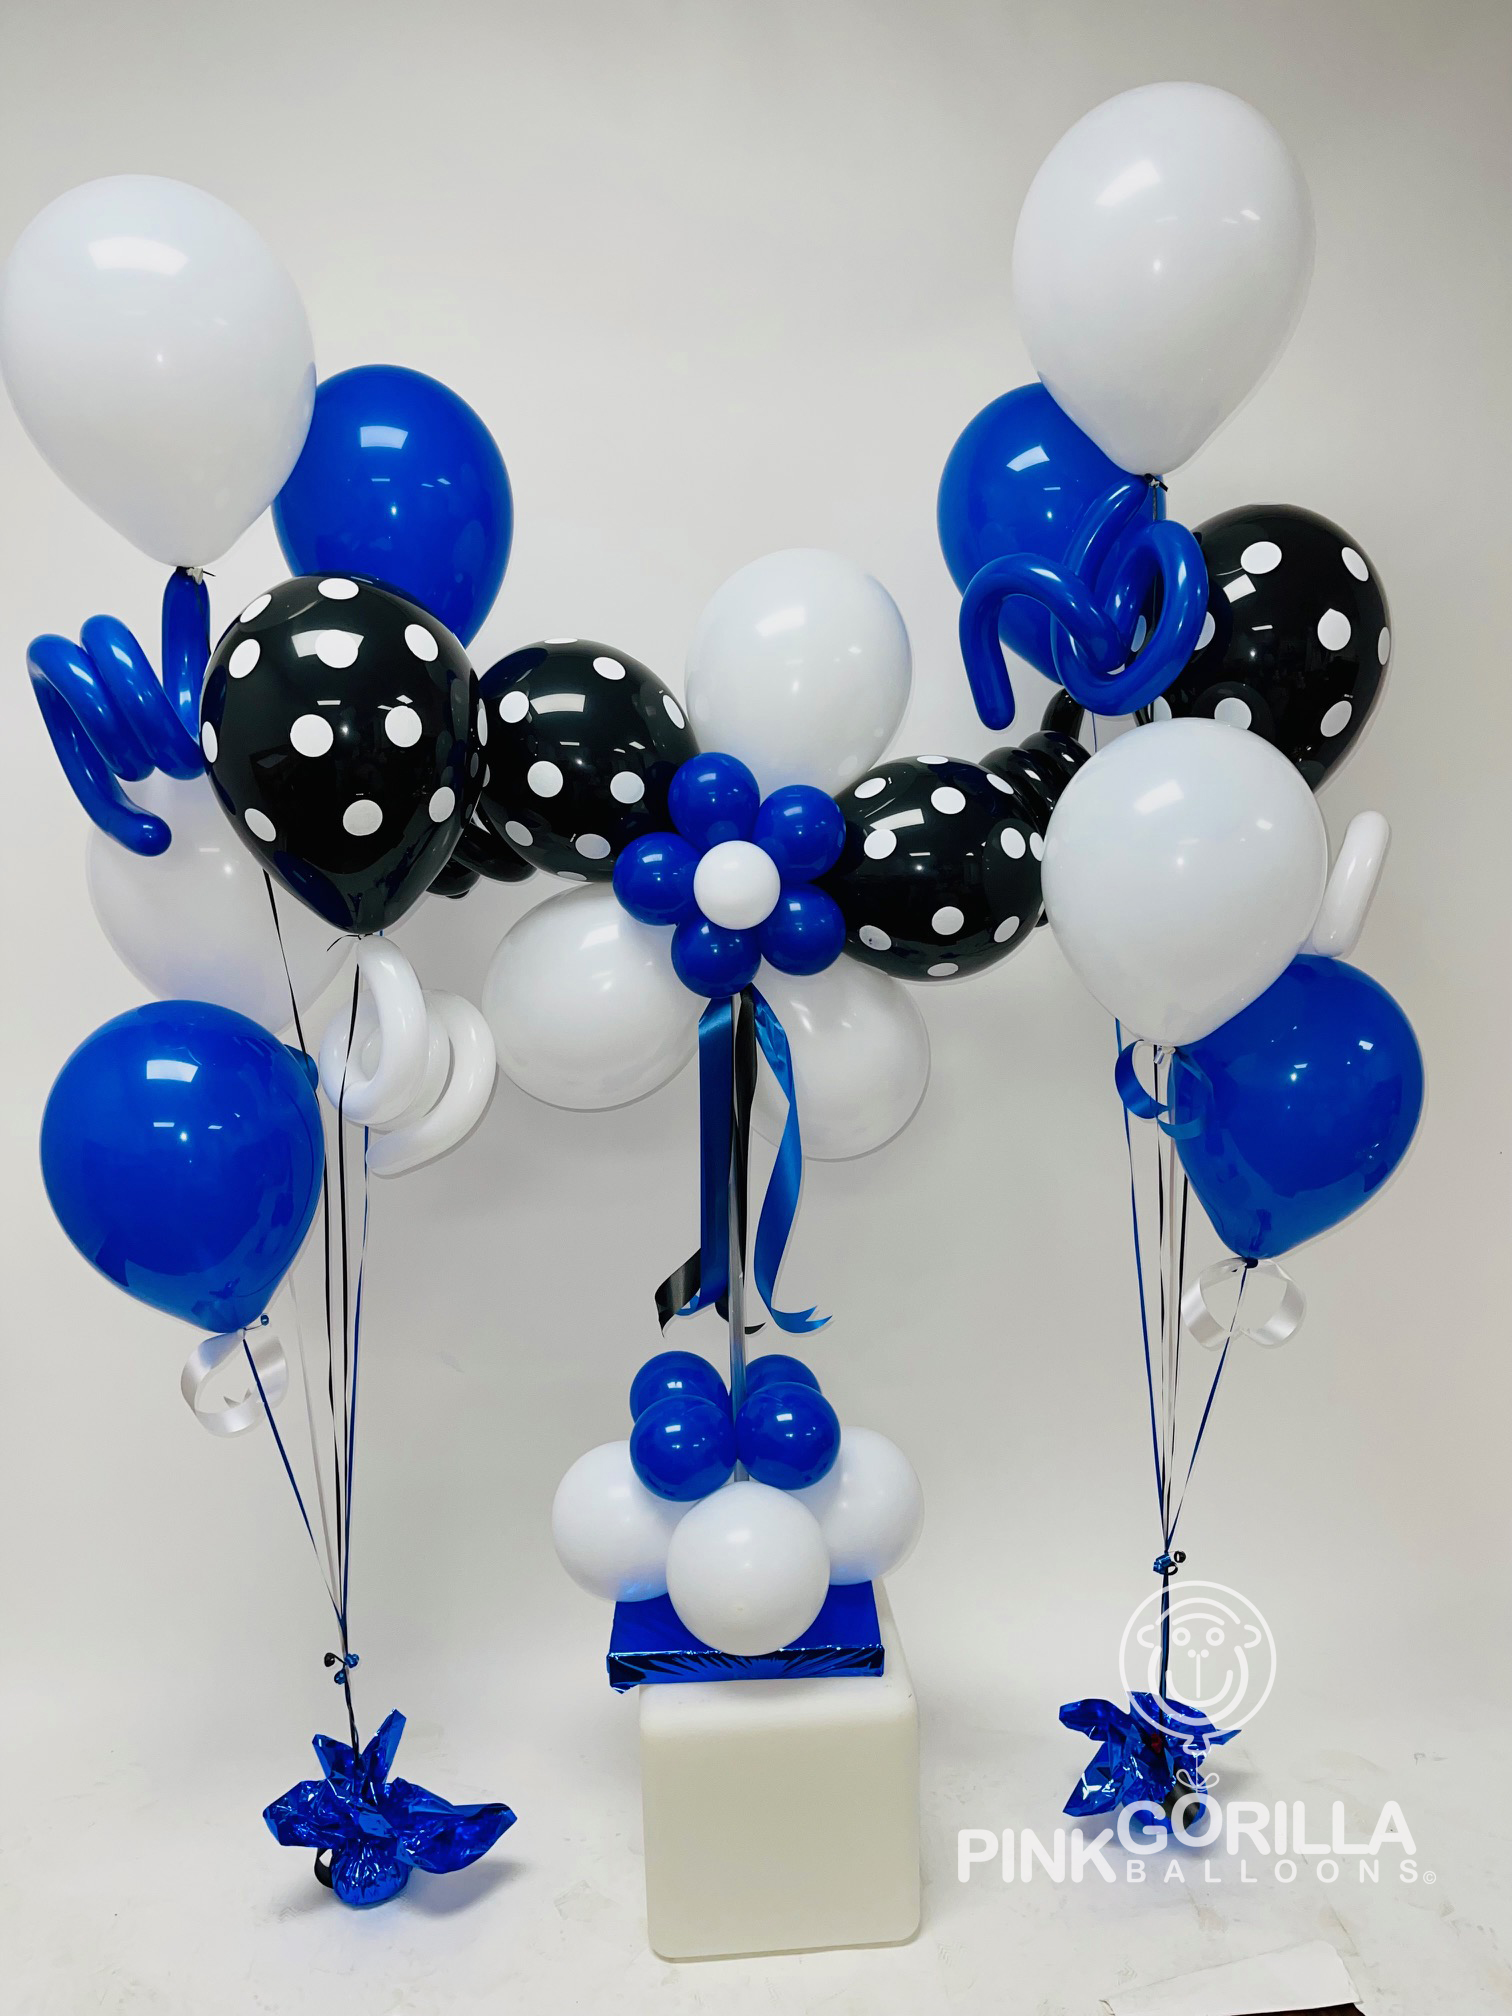 BALLOON FLOWERS ON POLE WITH MATCHING BALLOON BOUQUETS